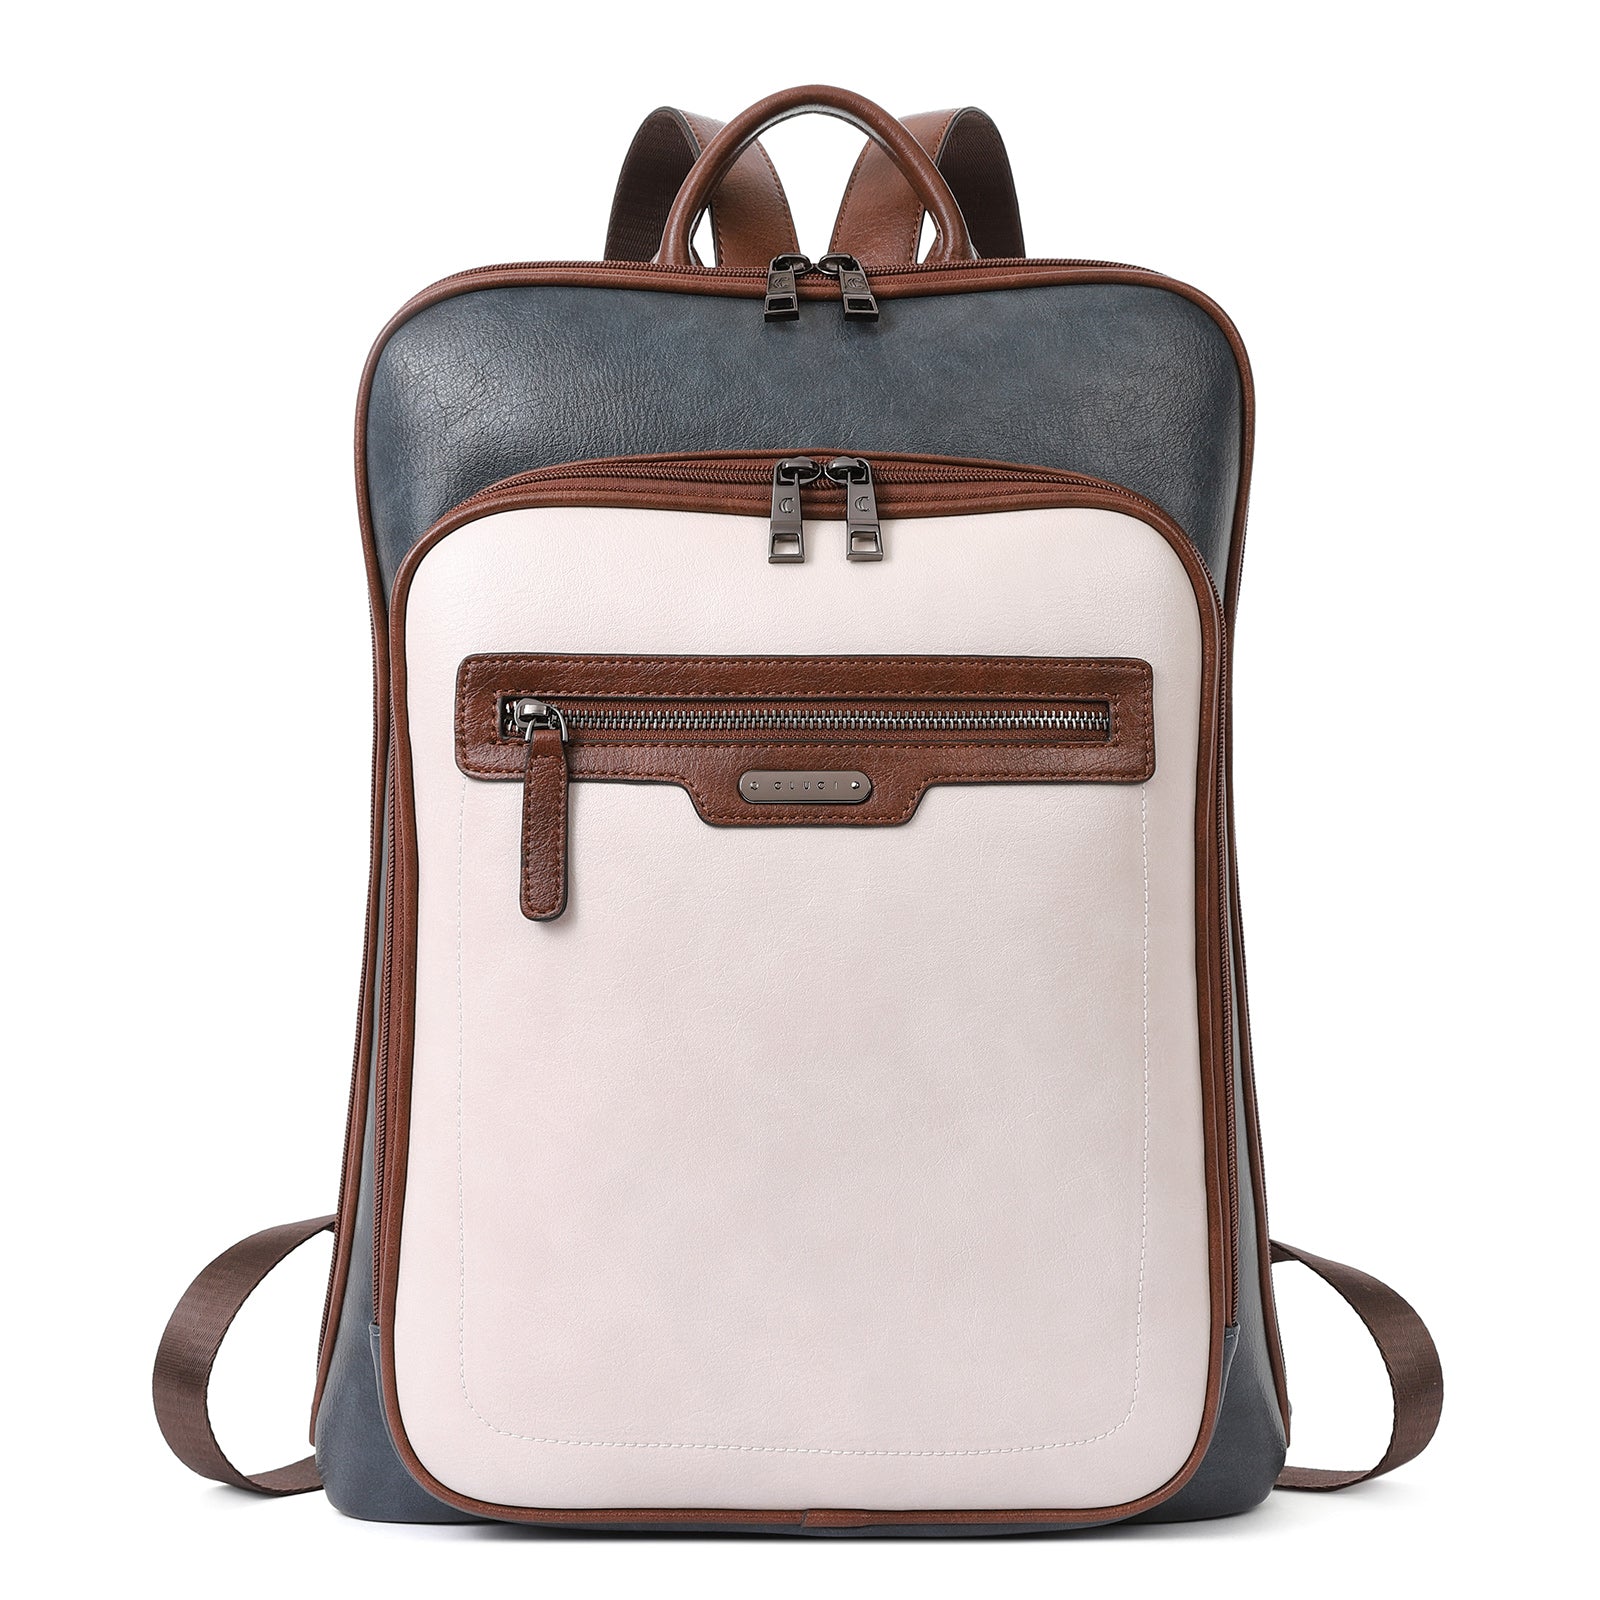 Koch Leather Laptop Backpack For Women With 15.6" Laptop Compartment